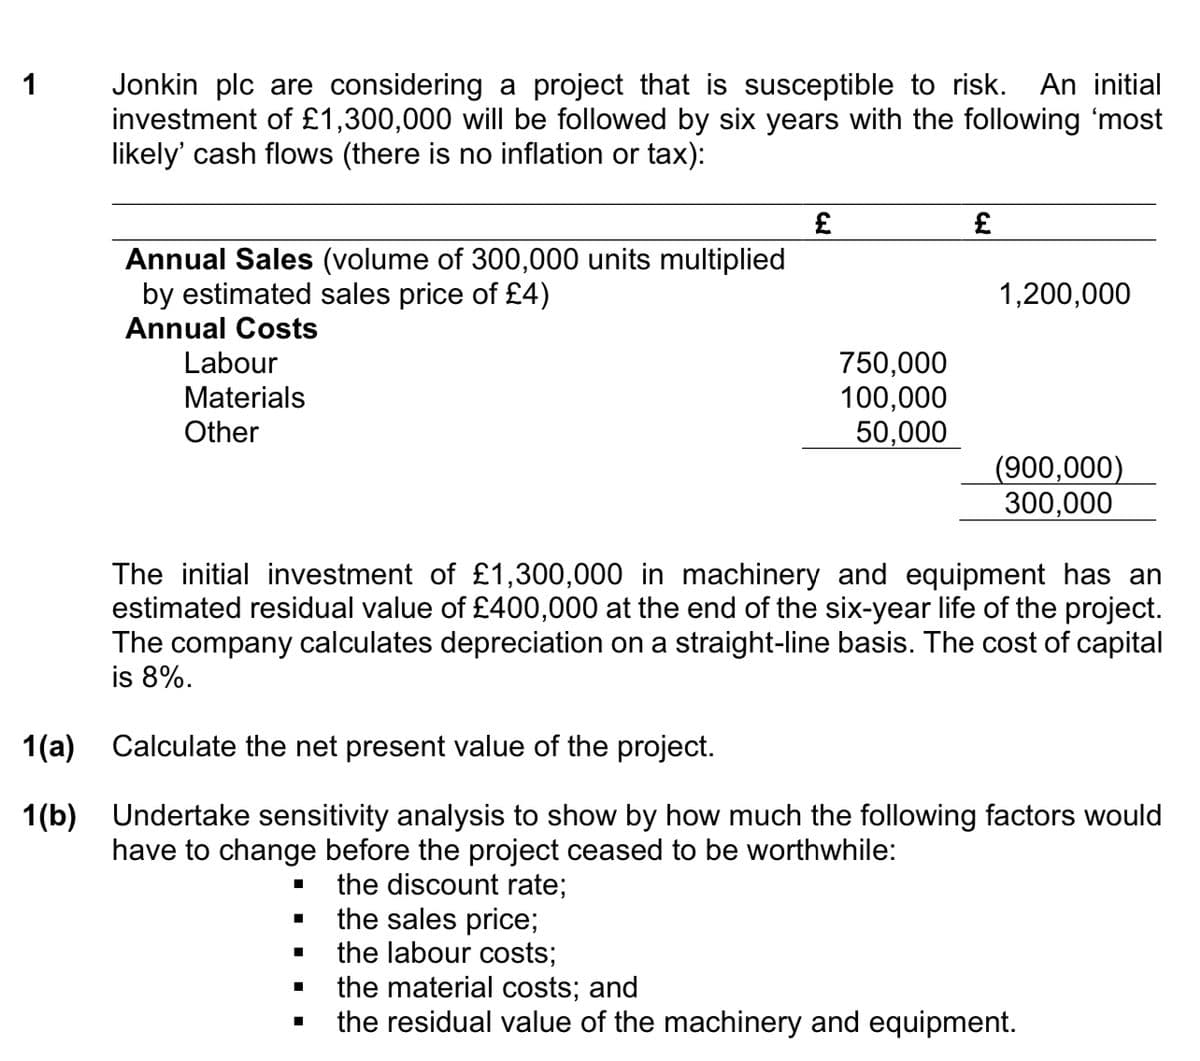 1
1(a)
1(b)
Jonkin plc are considering a project that is susceptible to risk. An initial
investment of £1,300,000 will be followed by six years with the following 'most
likely' cash flows (there is no inflation or tax):
Annual Sales (volume of 300,000 units multiplied
by estimated sales price of £4)
Annual Costs
Labour
Materials
Other
■
£
■
750,000
100,000
50,000
the sales price;
the labour costs;
£
The initial investment of £1,300,000 in machinery and equipment has an
estimated residual value of £400,000 at the end of the six-year life of the project.
The company calculates depreciation on a straight-line basis. The cost of capital
is 8%.
1,200,000
Calculate the net present value of the project.
Undertake sensitivity analysis to show by how much the following factors would
have to change before the project ceased to be worthwhile:
the discount rate;
(900,000)
300,000
the material costs; and
the residual value of the machinery and equipment.